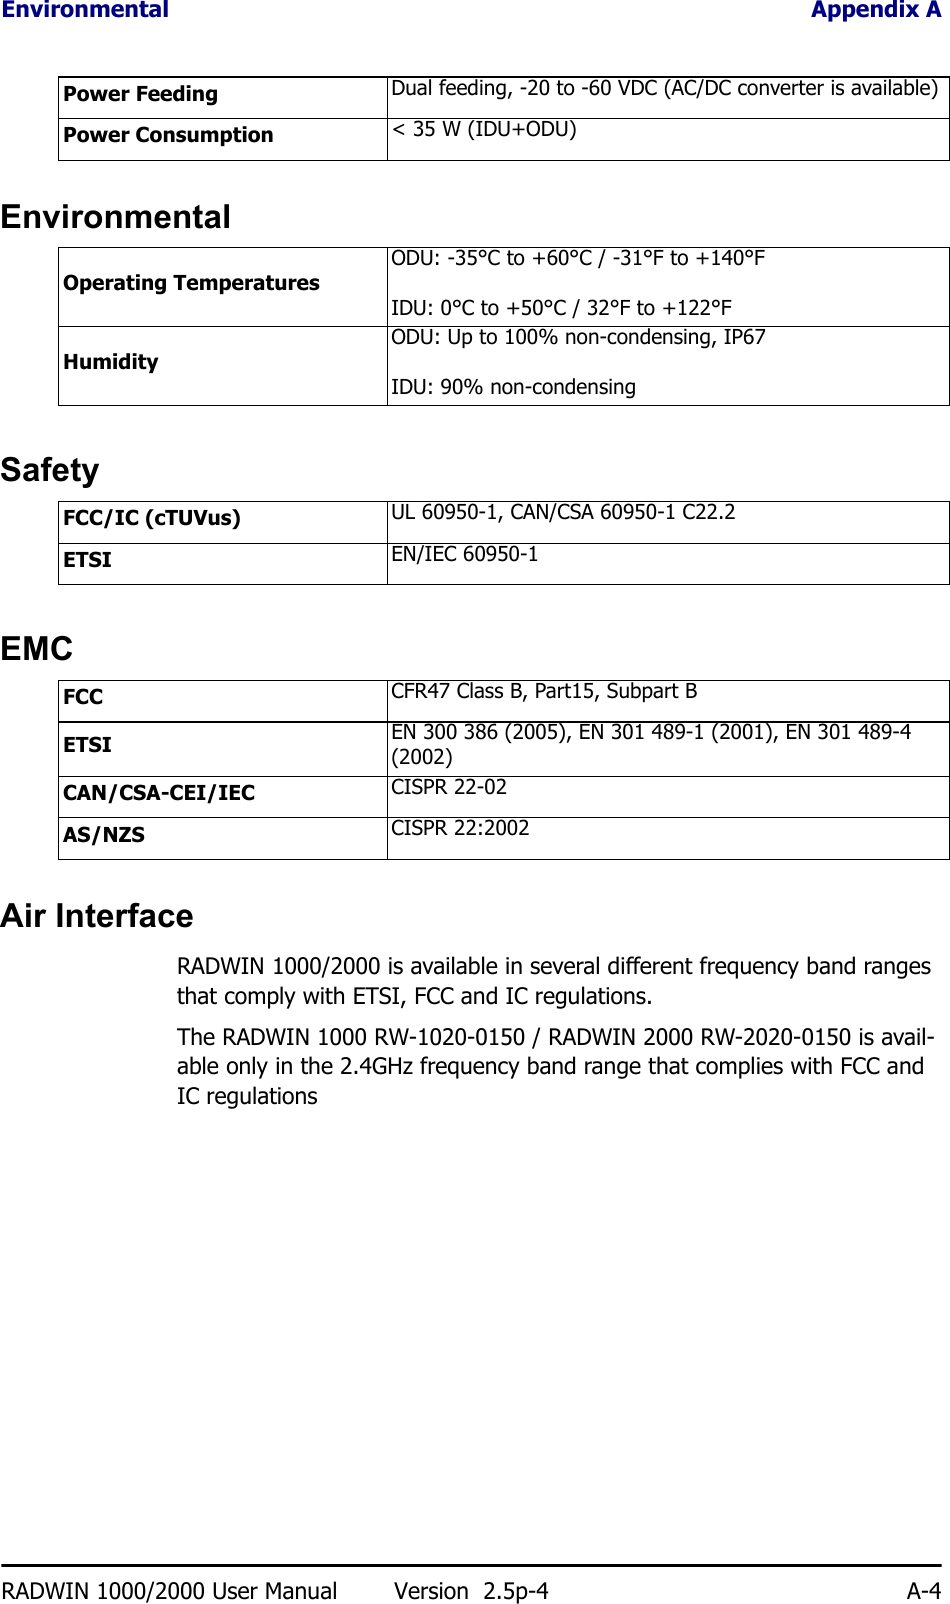 Environmental Appendix ARADWIN 1000/2000 User Manual Version  2.5p-4 A-4EnvironmentalSafetyEMCAir InterfaceRADWIN 1000/2000 is available in several different frequency band ranges that comply with ETSI, FCC and IC regulations.The RADWIN 1000 RW-1020-0150 / RADWIN 2000 RW-2020-0150 is avail-able only in the 2.4GHz frequency band range that complies with FCC and IC regulationsPower Feeding Dual feeding, -20 to -60 VDC (AC/DC converter is available)Power Consumption &lt; 35 W (IDU+ODU)Operating TemperaturesODU: -35°C to +60°C / -31°F to +140°FIDU: 0°C to +50°C / 32°F to +122°FHumidityODU: Up to 100% non-condensing, IP67IDU: 90% non-condensingFCC/IC (cTUVus) UL 60950-1, CAN/CSA 60950-1 C22.2ETSI EN/IEC 60950-1FCC CFR47 Class B, Part15, Subpart BETSI EN 300 386 (2005), EN 301 489-1 (2001), EN 301 489-4 (2002)CAN/CSA-CEI/IEC CISPR 22-02AS/NZS CISPR 22:2002